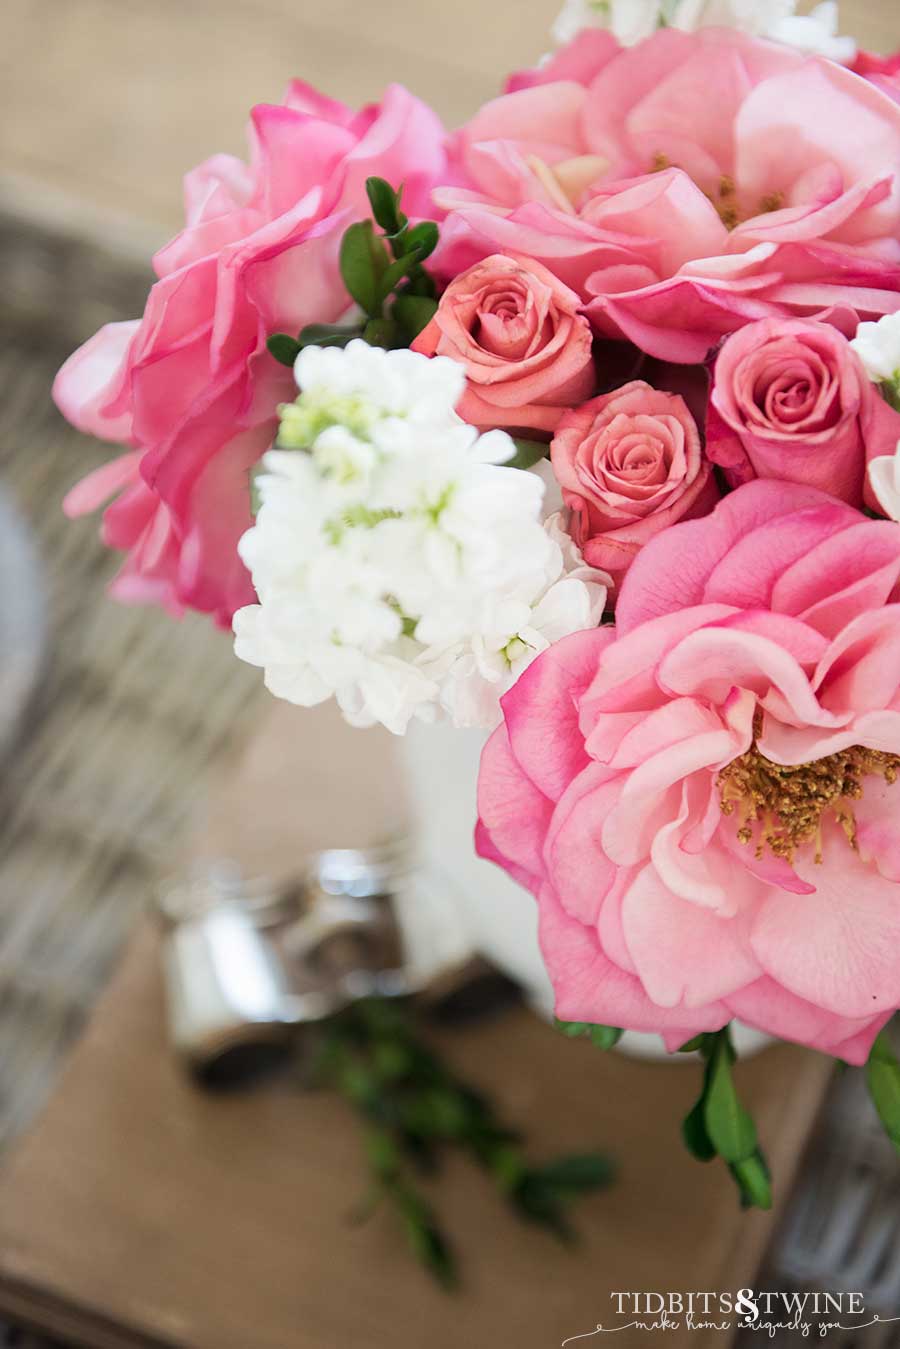 Pink roses and white stock centerpiece